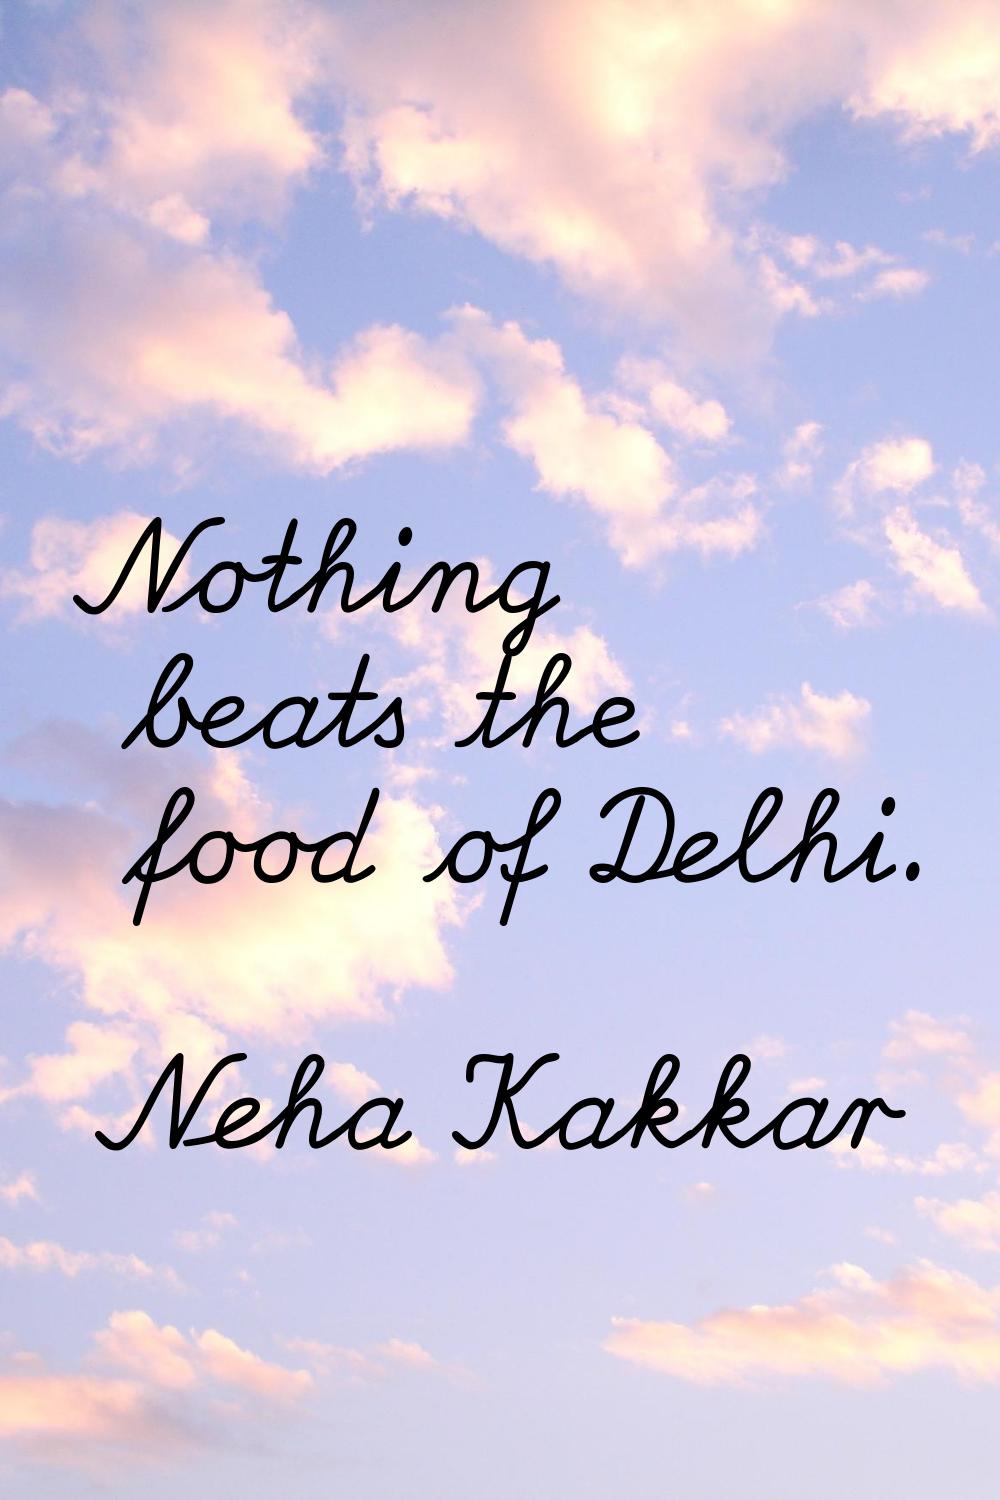 Nothing beats the food of Delhi.